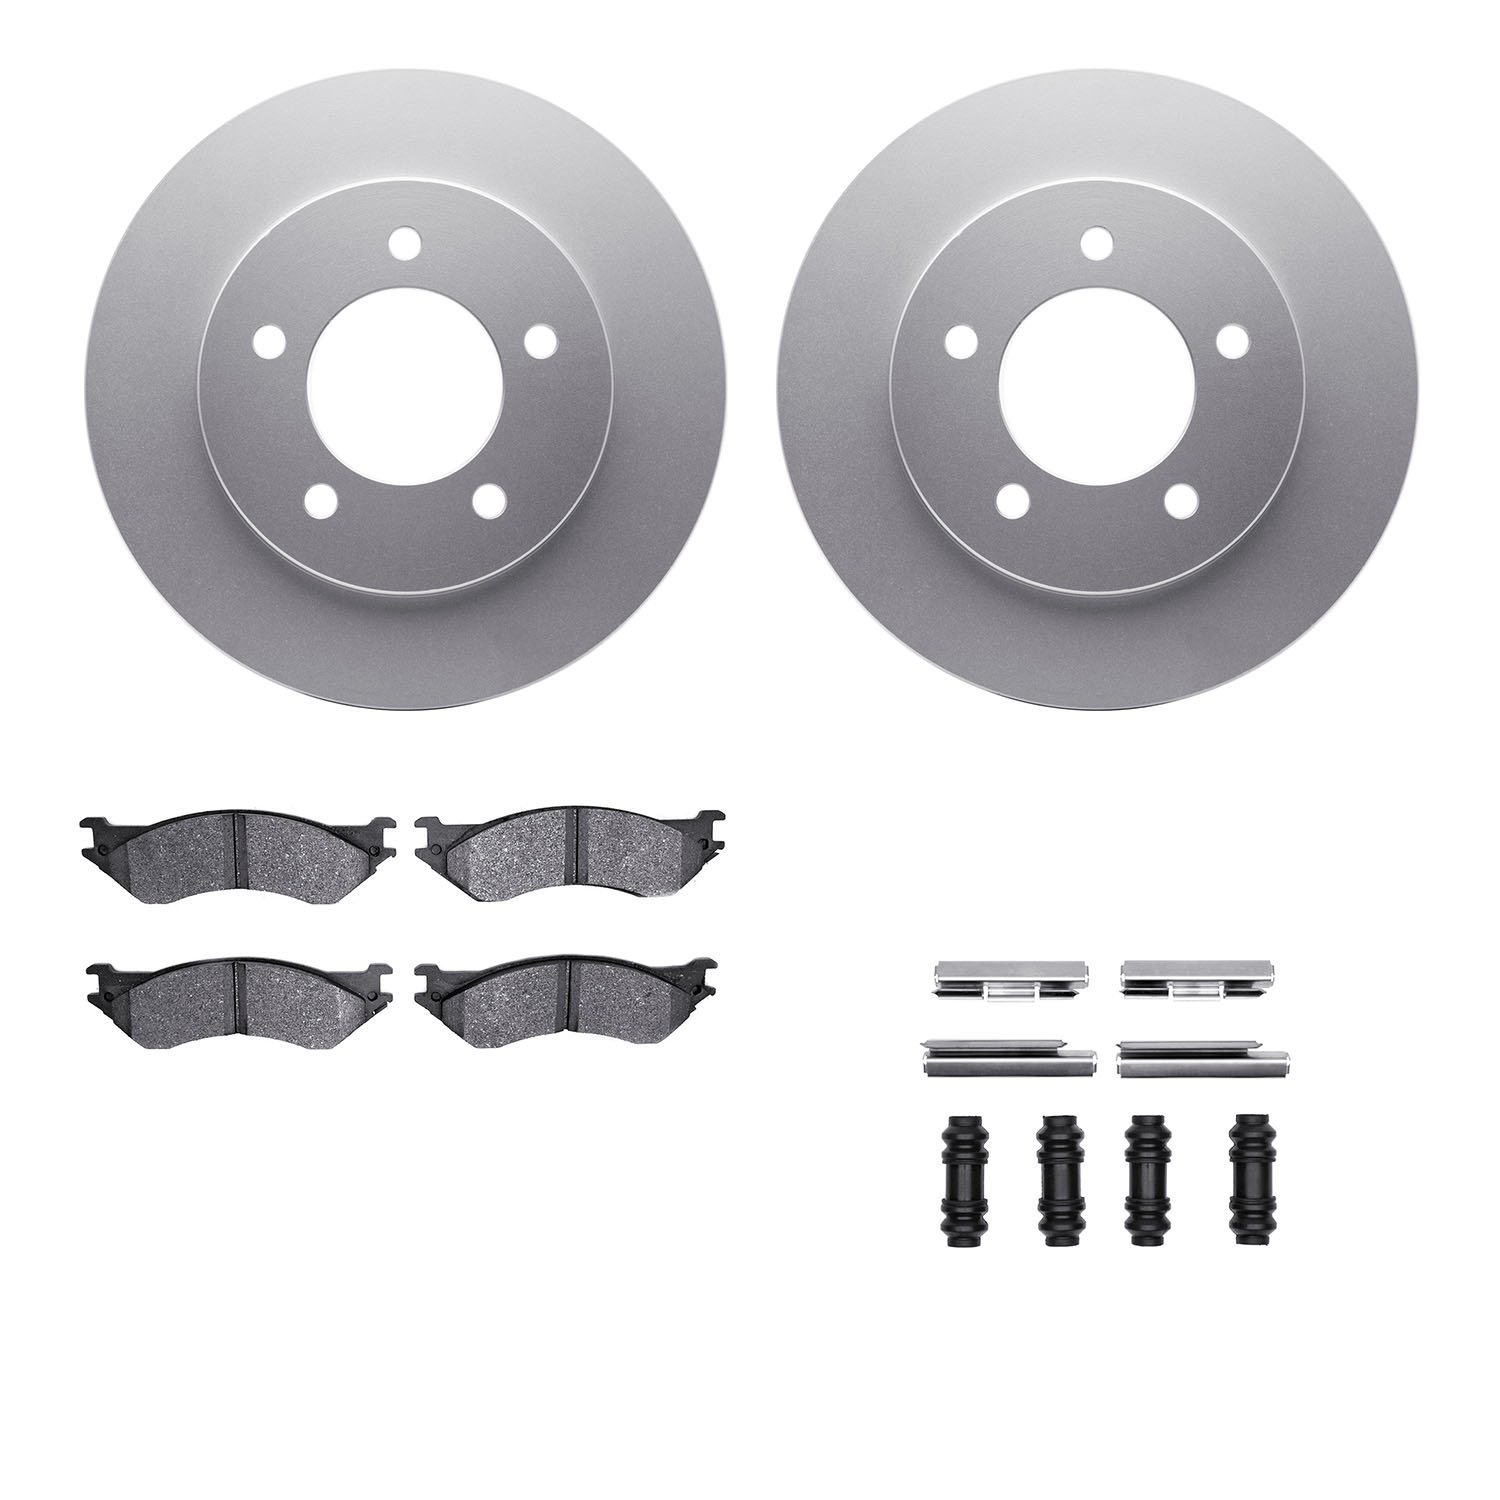 4412-54039 Geospec Brake Rotors with Ultimate-Duty Brake Pads & Hardware, 1997-2002 Ford/Lincoln/Mercury/Mazda, Position: Front